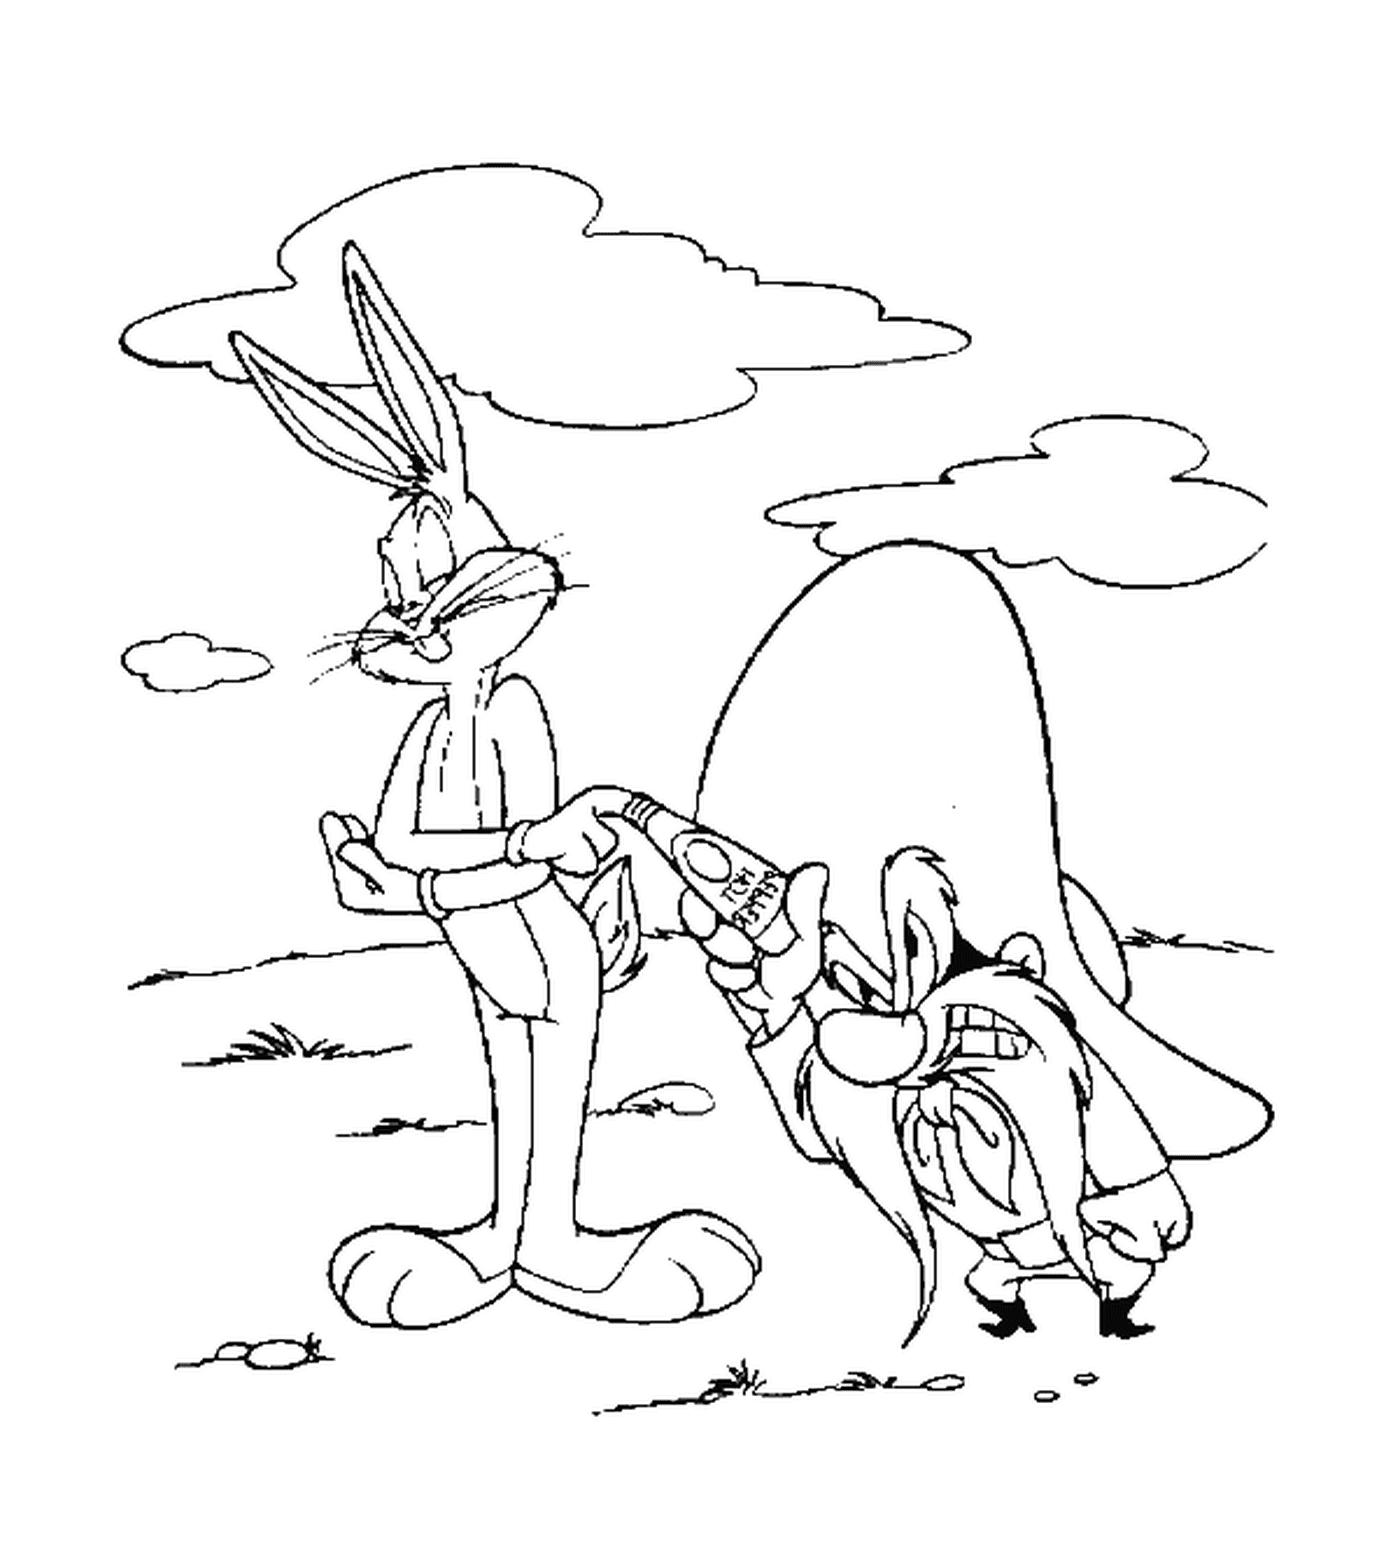  Sam the pirate and Bugs Bunny 